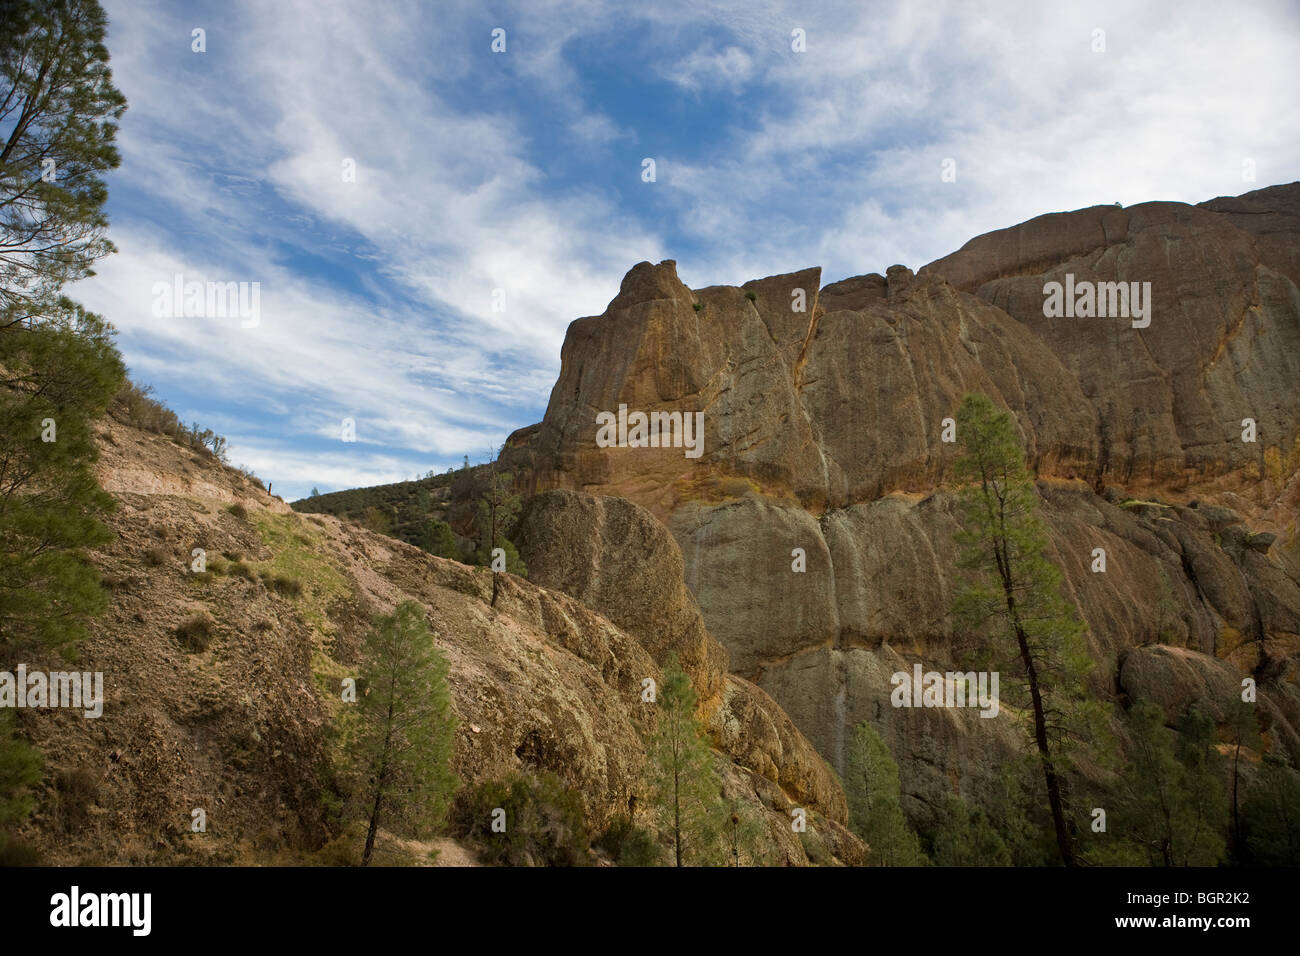 Machete Ridge viewed from the Balconies Cliffs Trail, Pinnacles National Monument, California, United States of America Stock Photo